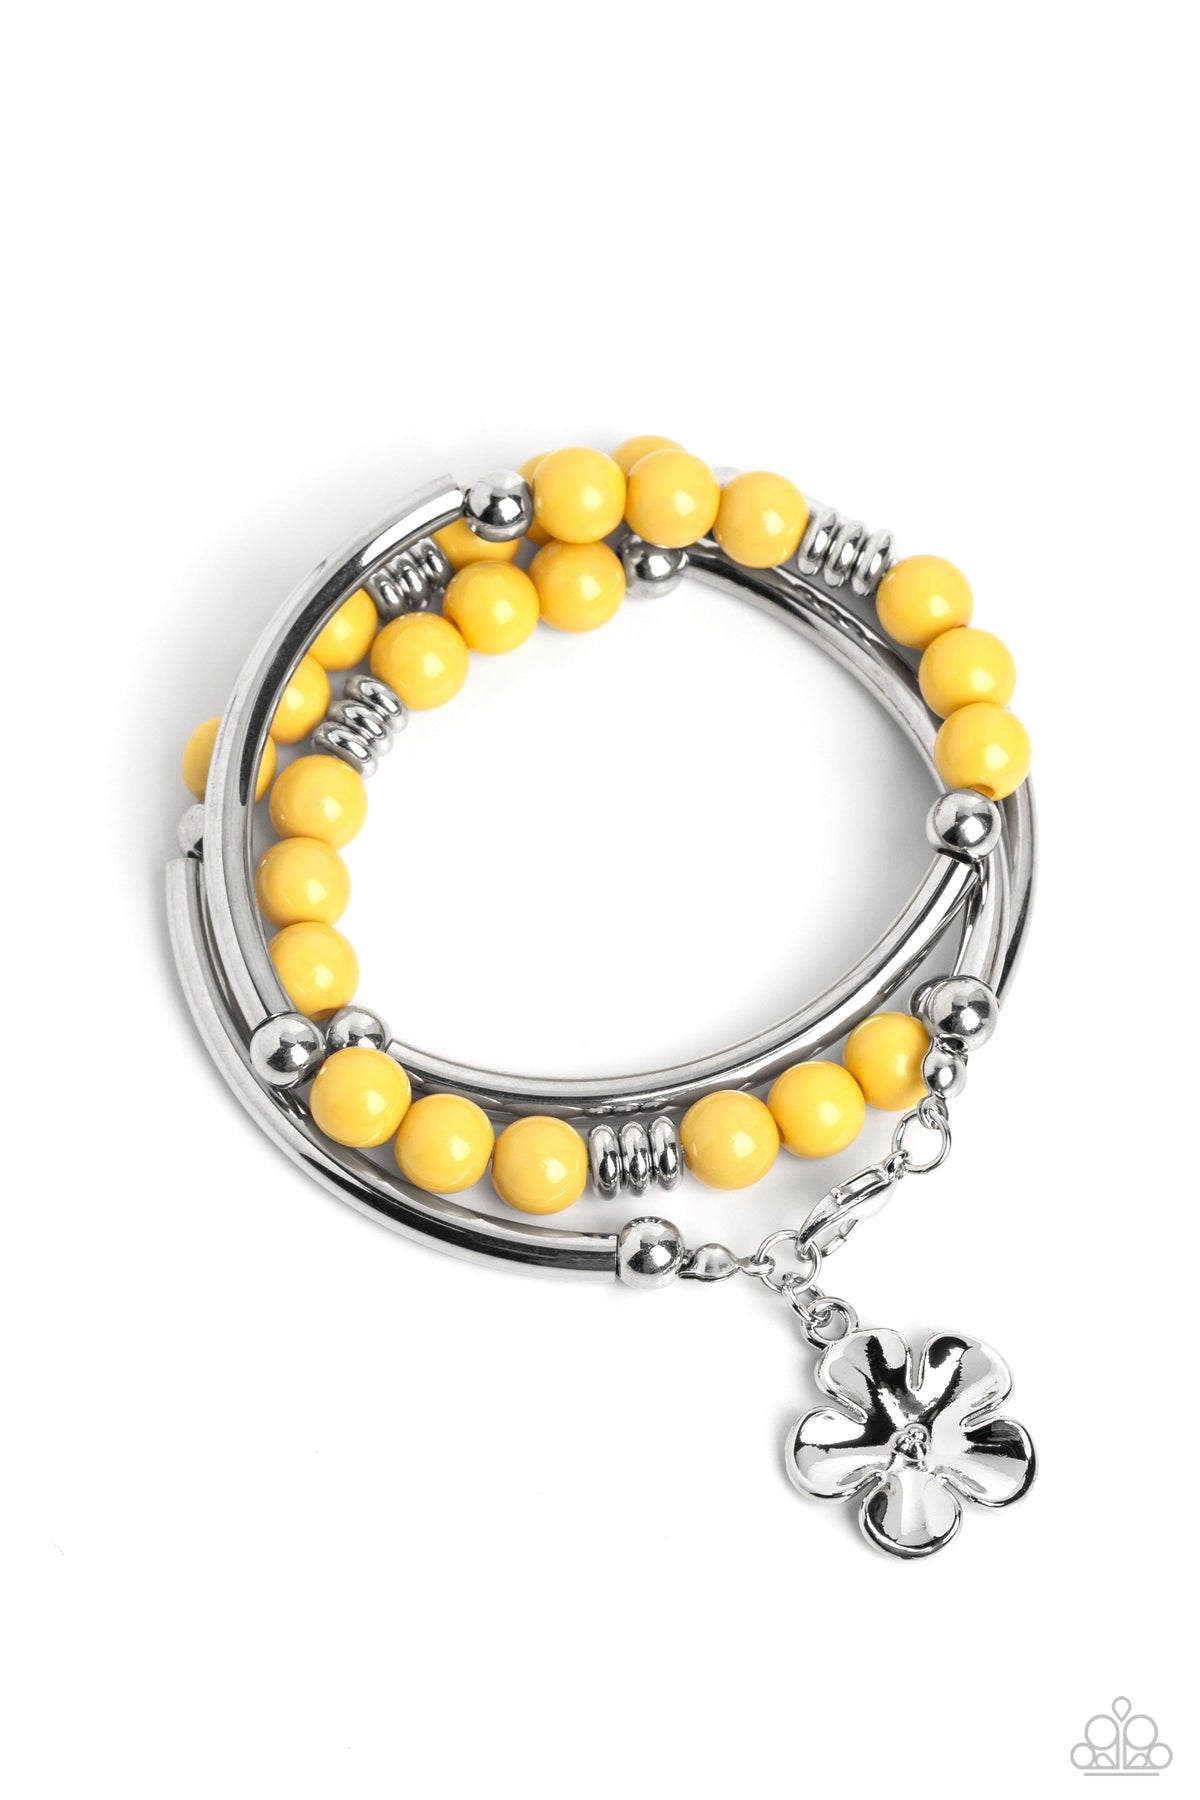 Off the WRAP Yellow Floral Coil Bracelet- lightbox - CarasShop.com - $5 Jewelry by Cara Jewels